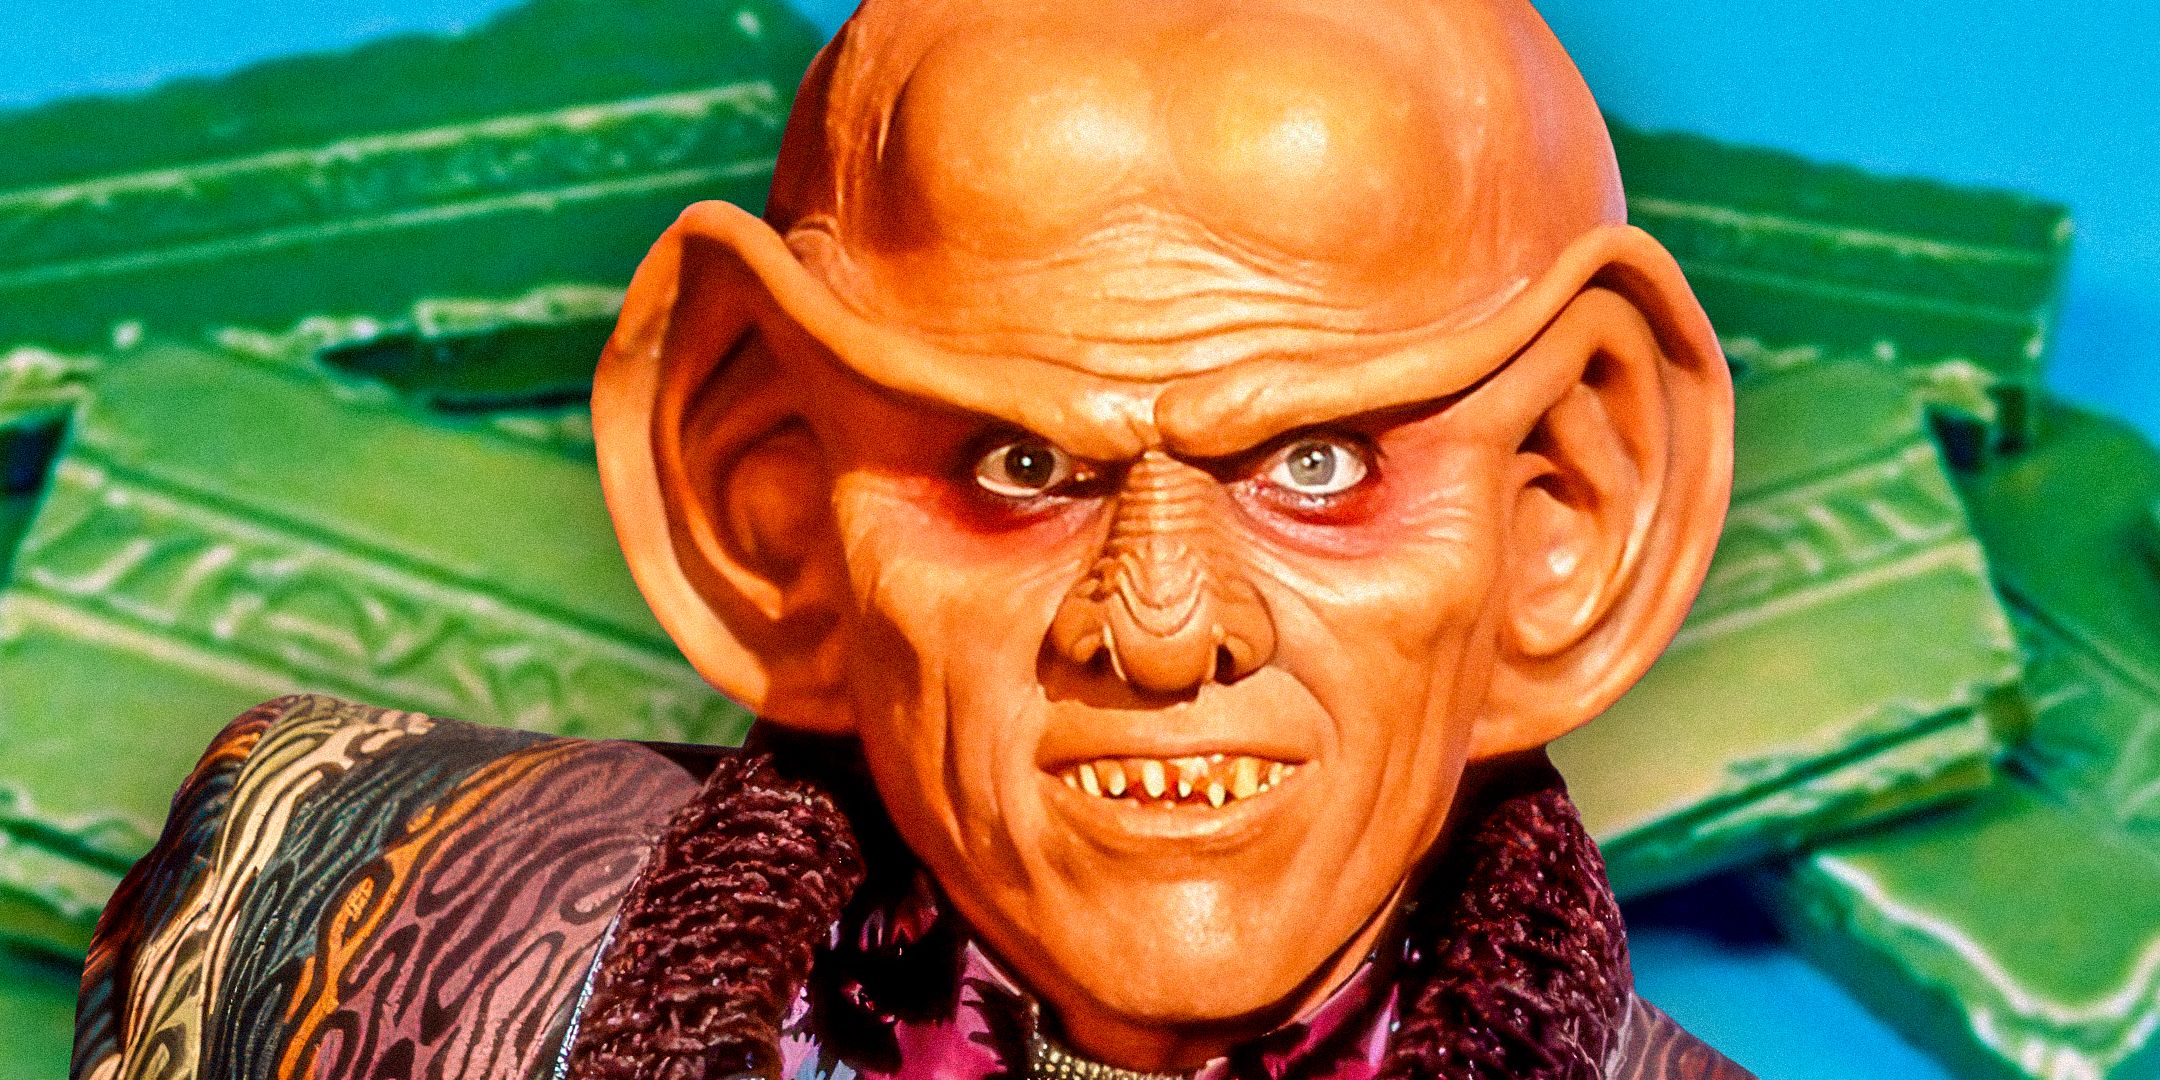 Armin Shimerman as Quark from Star Trek: Deep Space Nine with bars of latinum in the background